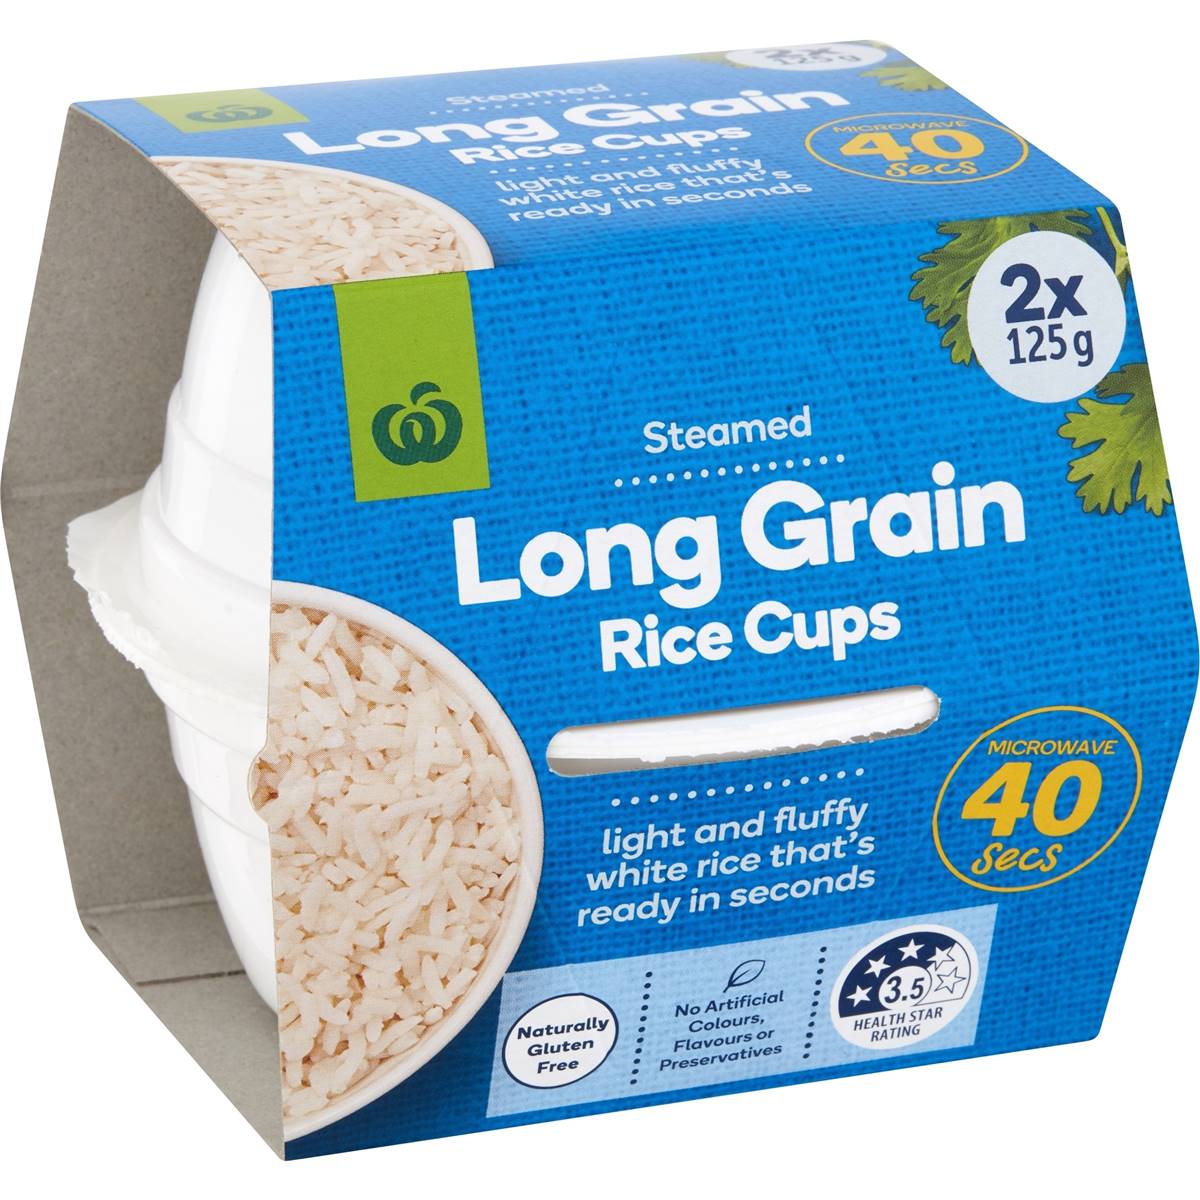 Calories in Woolworths Long Grain Rice Microwave Cups